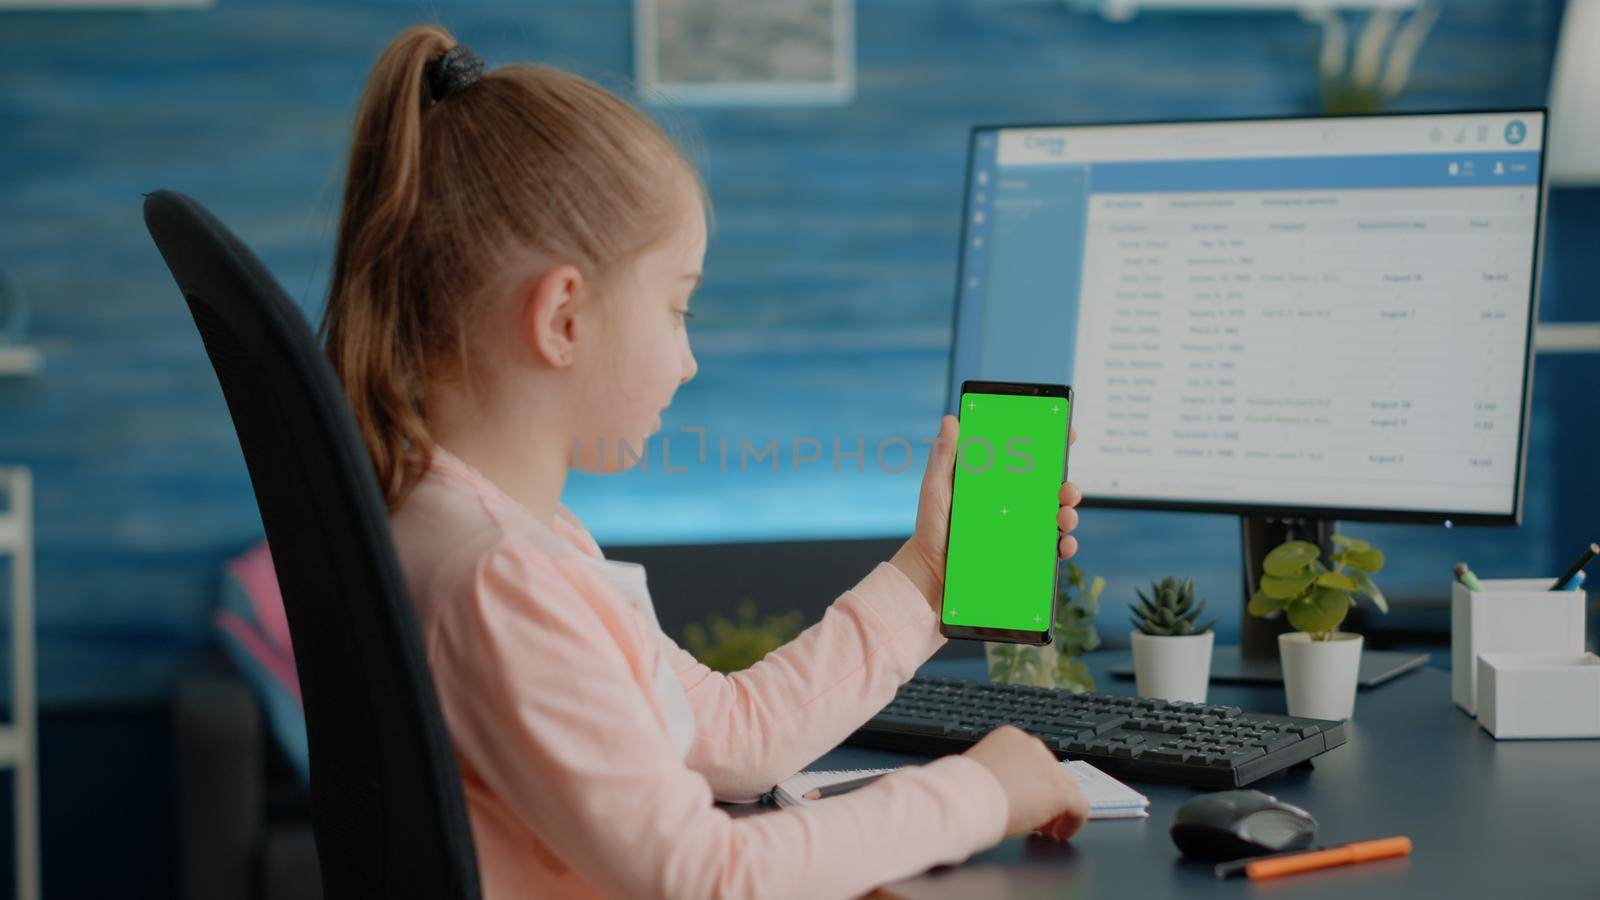 Child vertically holding smartphone with green screen by DCStudio